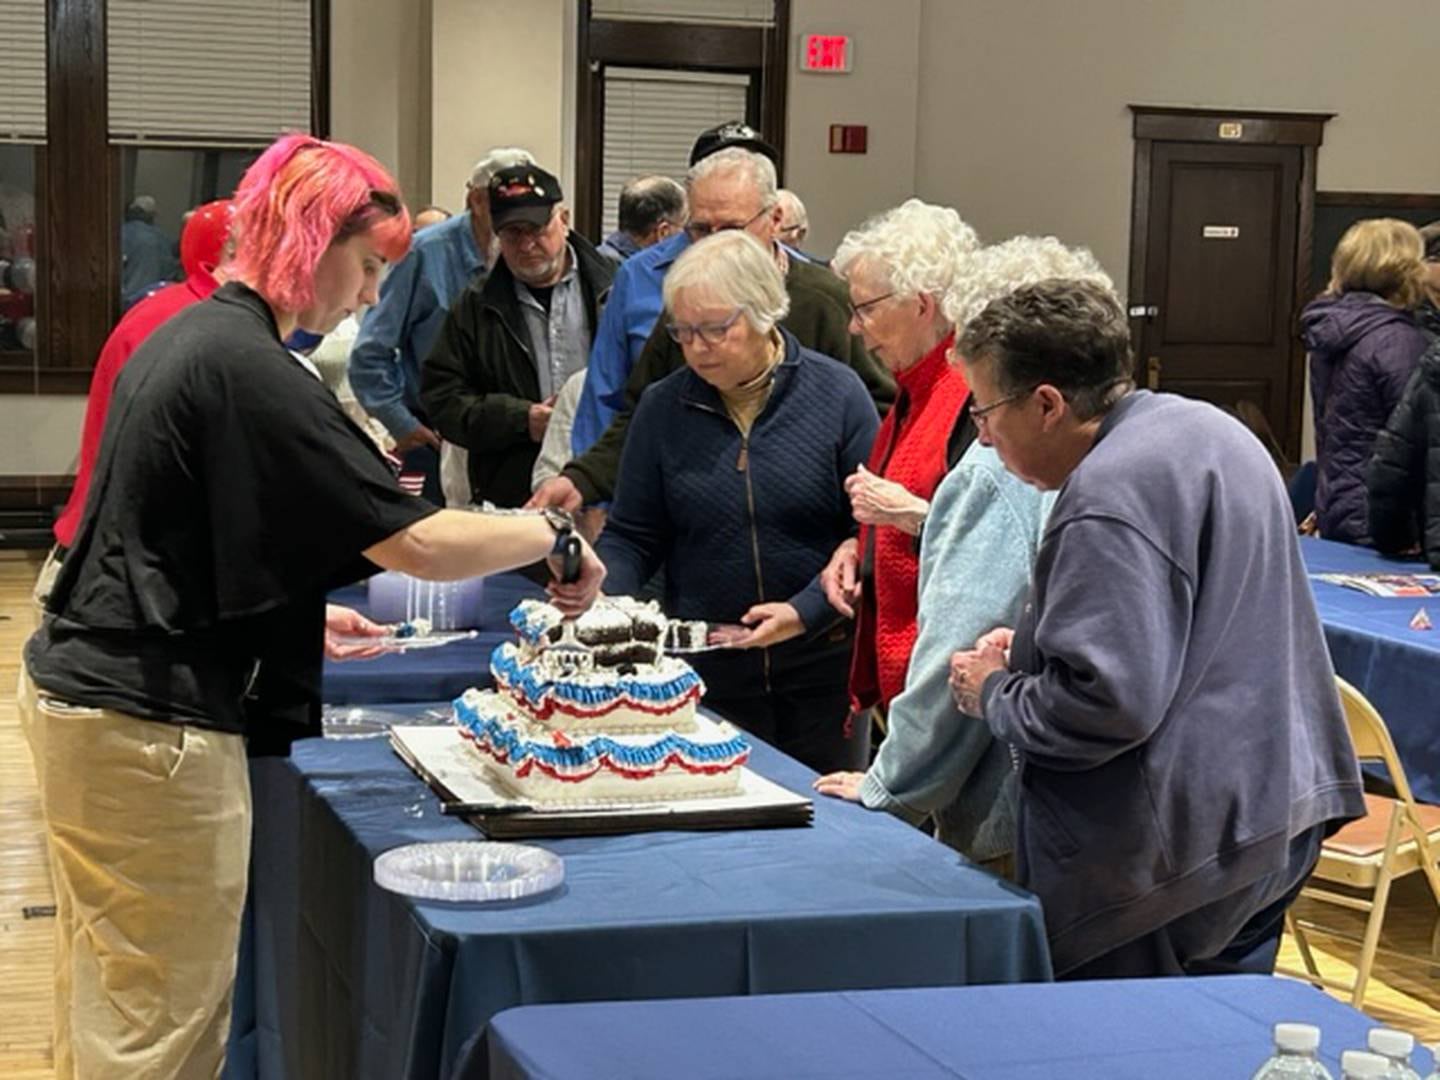 Visitors lined up at the Northwest Territory Historic Center in Dixon on Tuesday night to have a piece of birthday cake to celebrate President Ronald Reagan's birthday and the 40th anniversary of his visit to Dixon in 1984.